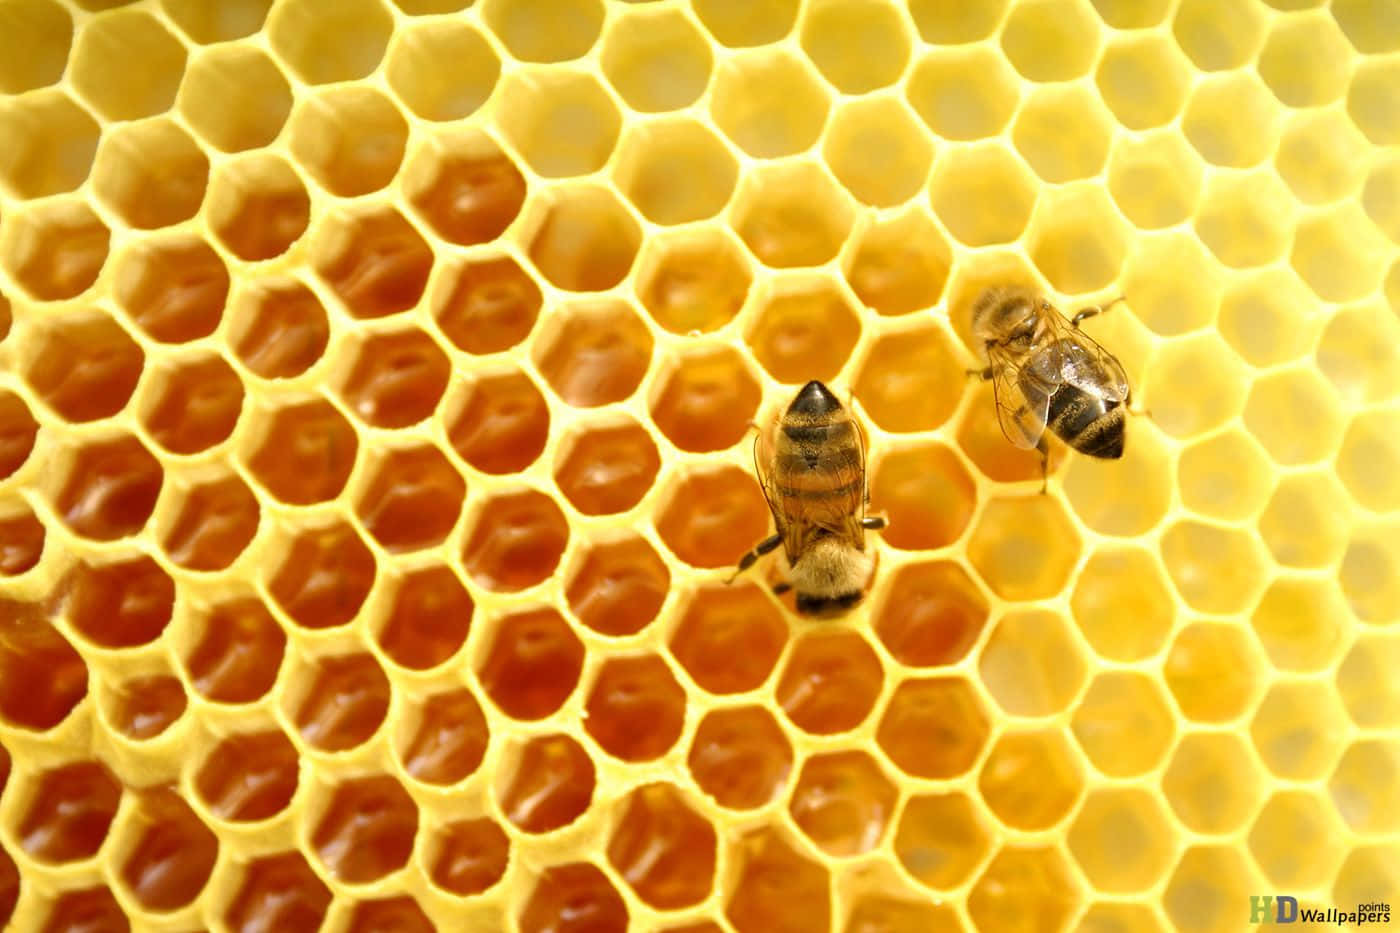 Two Bees Are Sitting On A Honeycomb